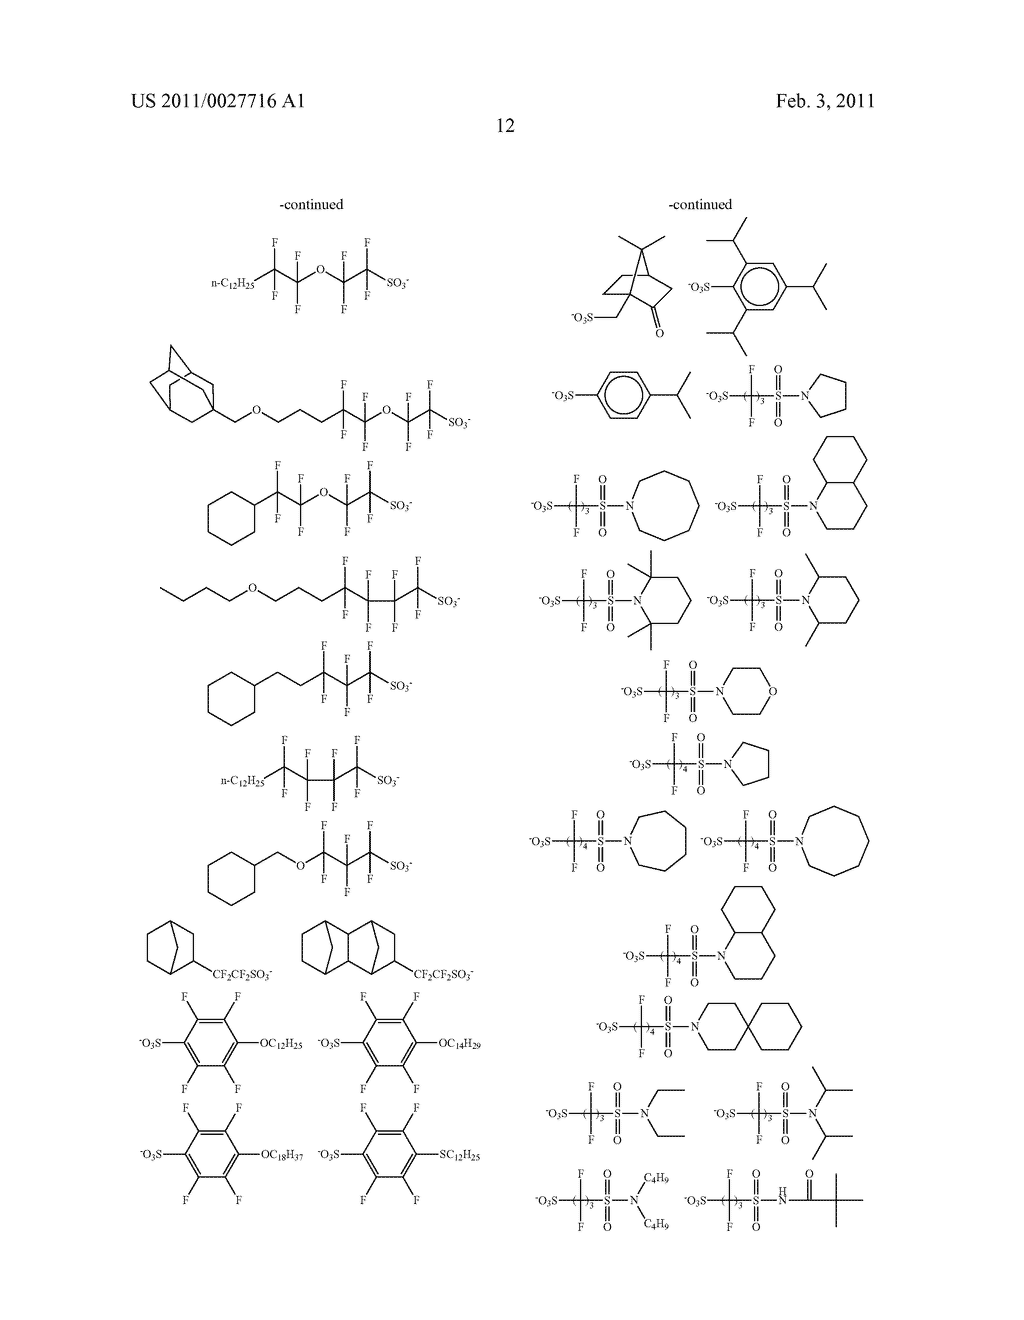 ACTINIC-RAY- OR RADIATION-SENSITIVE RESIN COMPOSITION, COMPOUND AND METHOD OF FORMING PATTERN USING THE COMPOSITION - diagram, schematic, and image 15